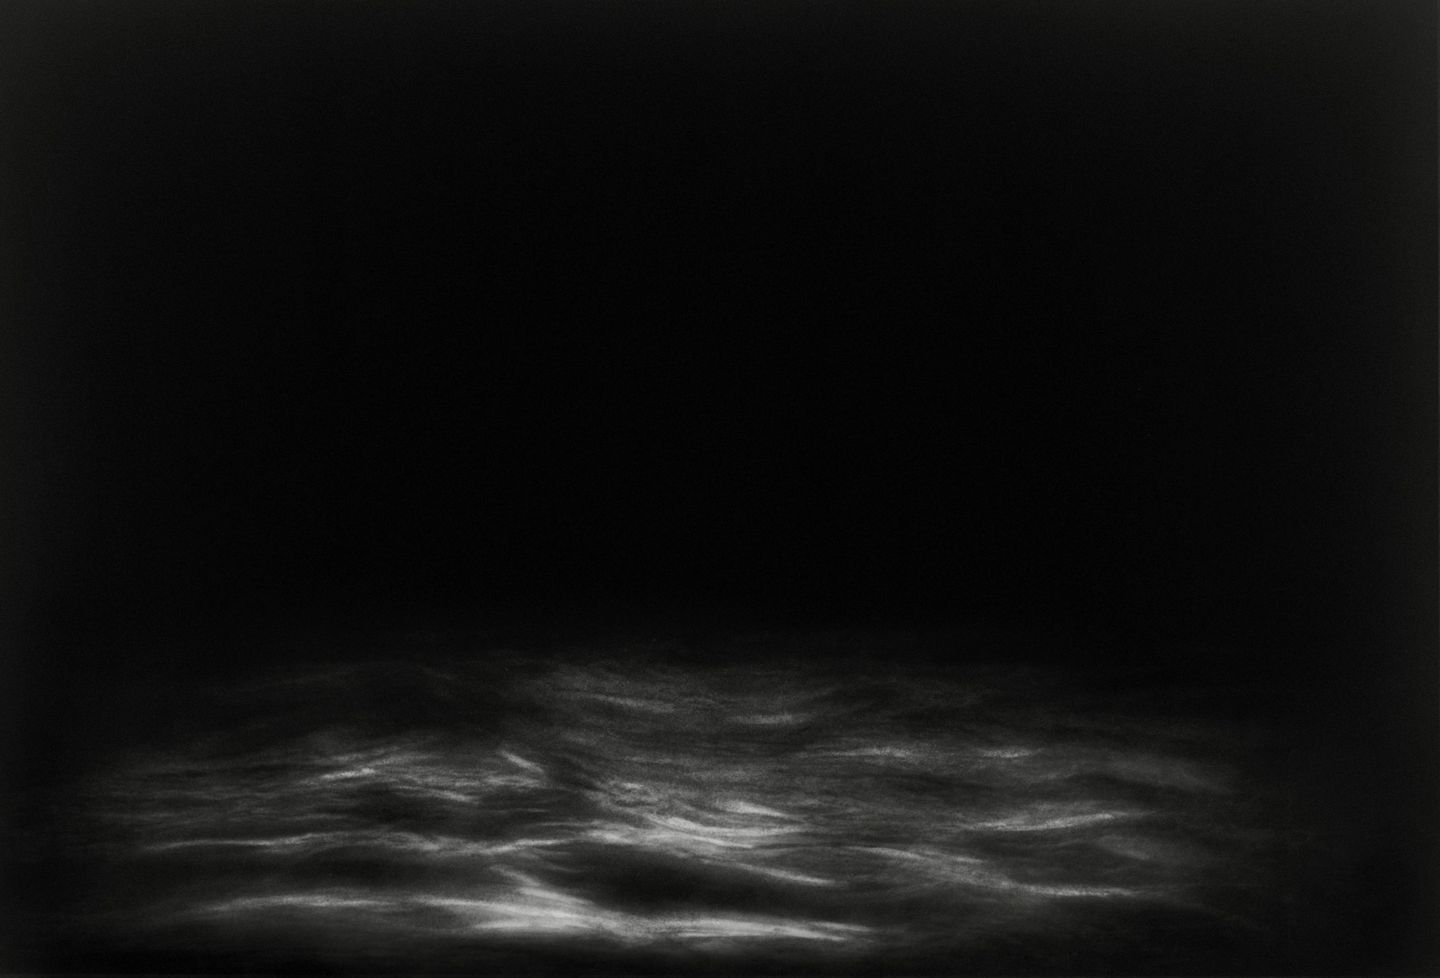 A black and white photo of some clouds in the dark.